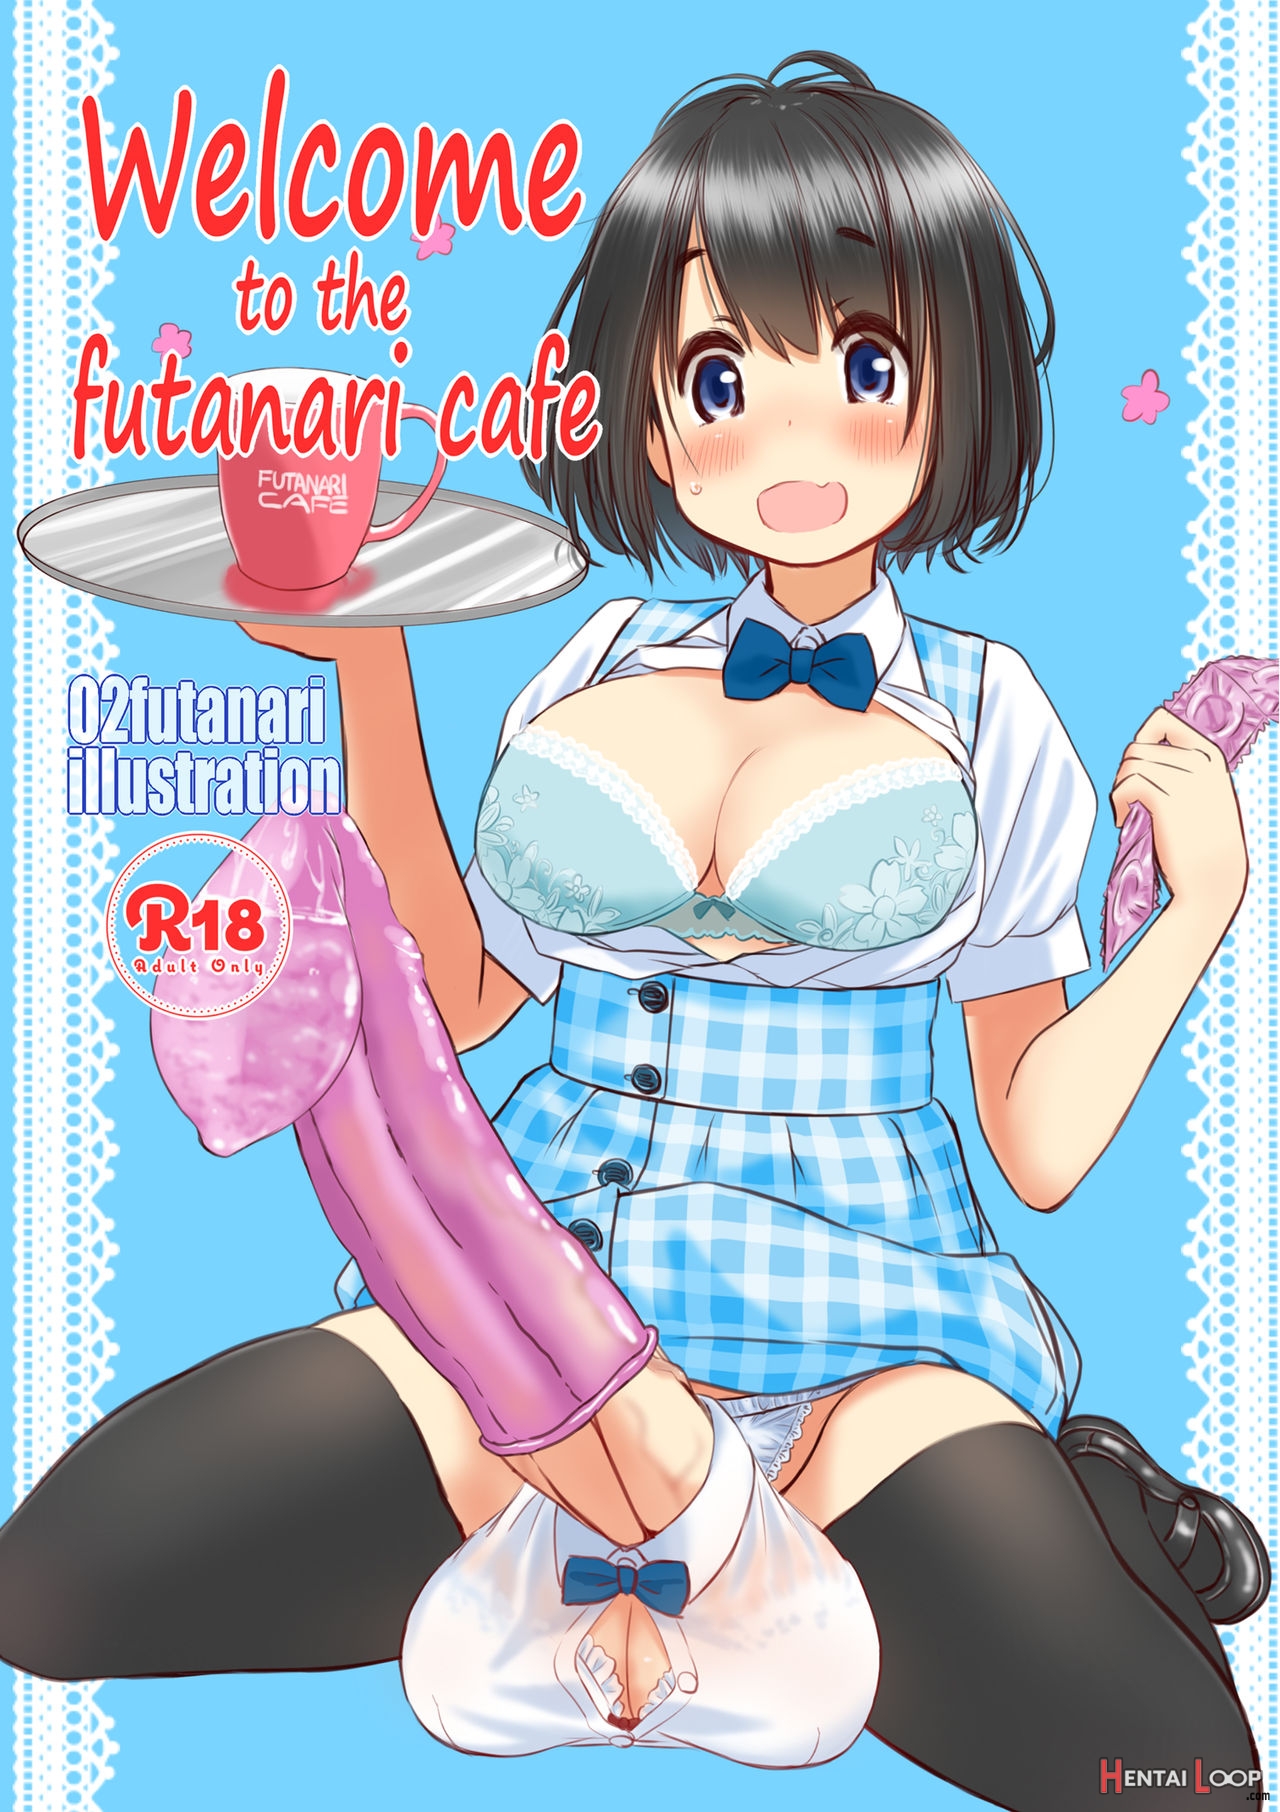 Welcome To The Futanari Cafe (by Mui) - Hentai doujinshi for free at  HentaiLoop